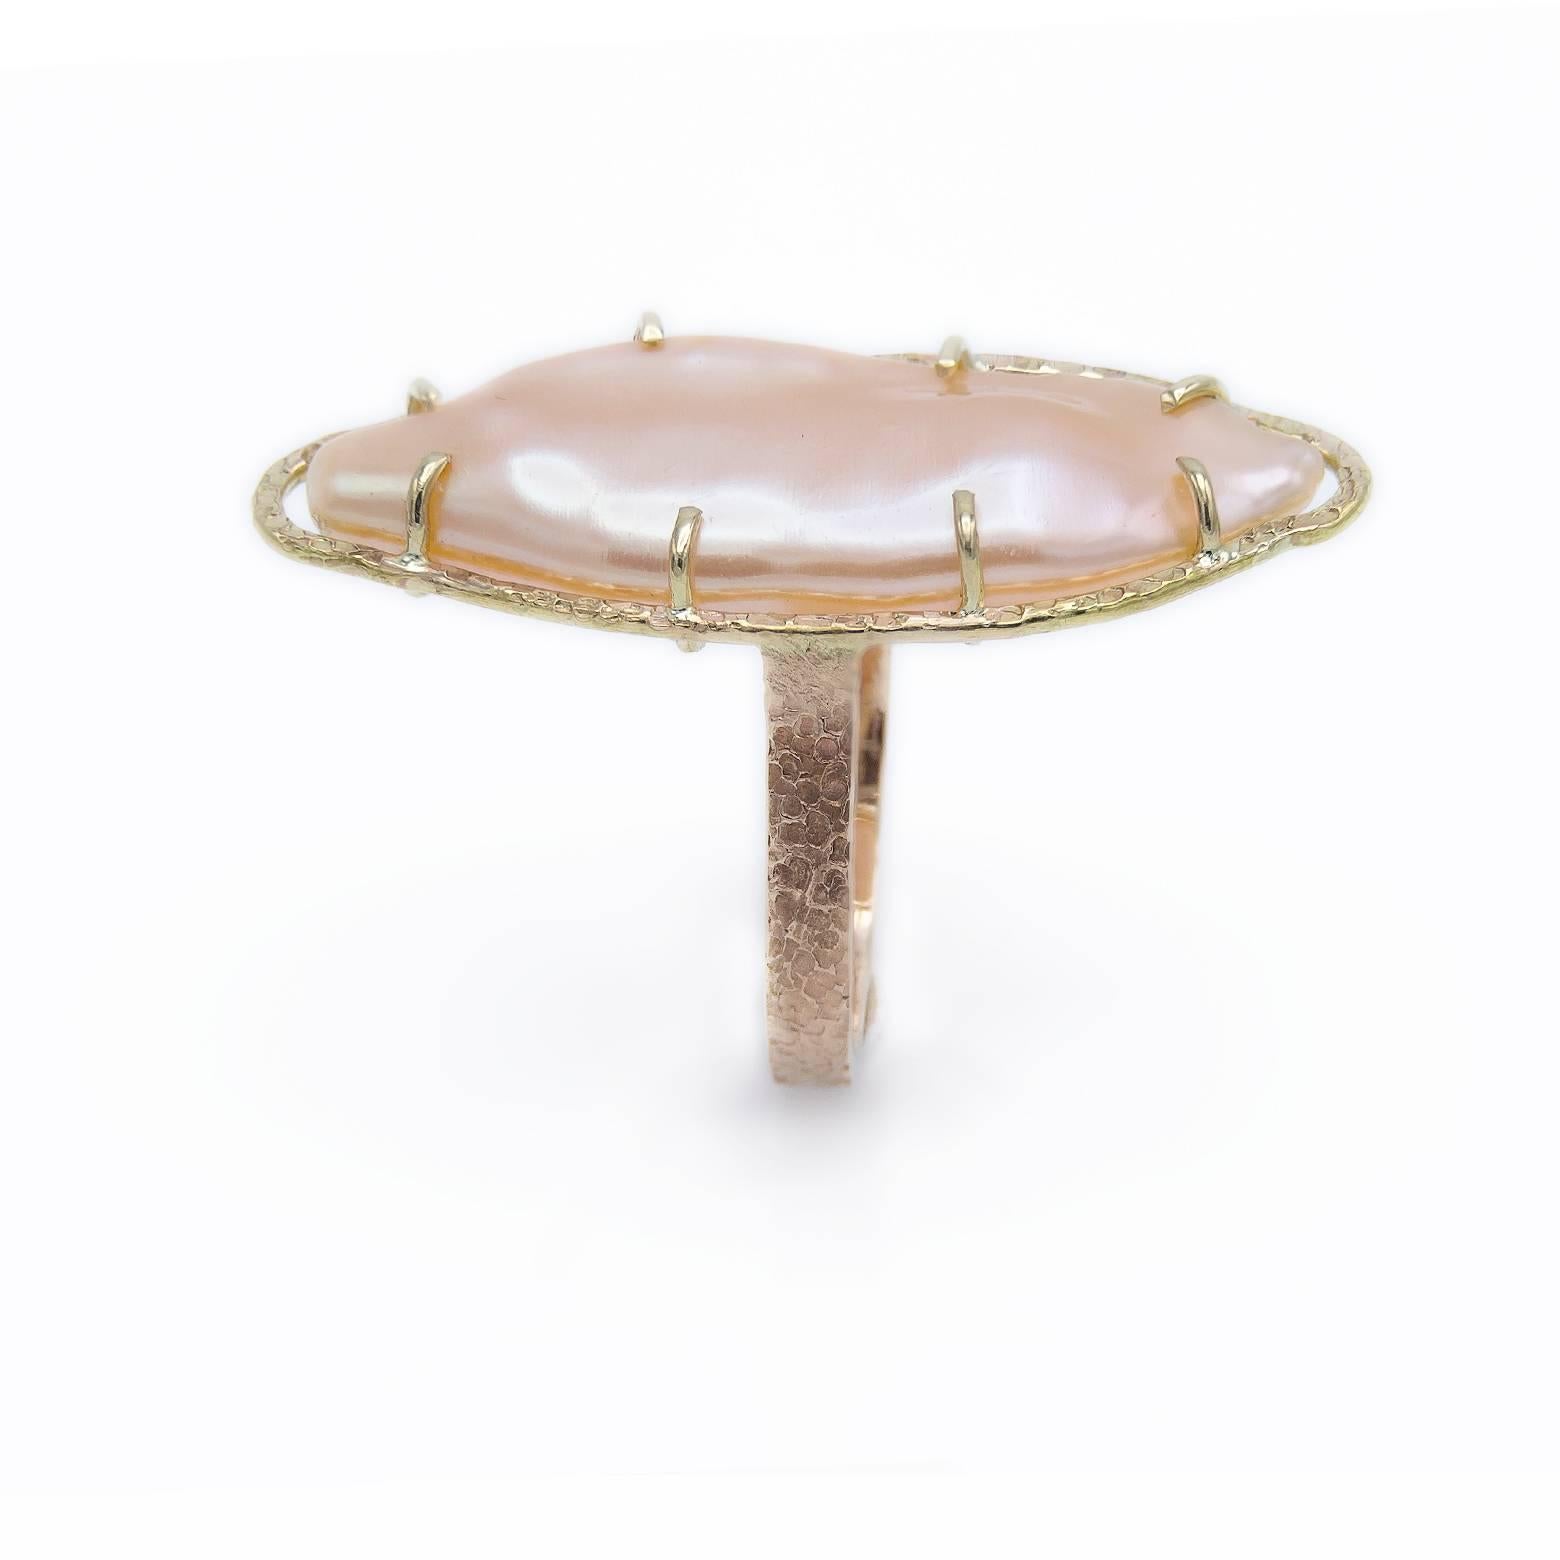 This luscious peach fresh water marquise-shaped pearl ring is glamorous and gorgeous. The creamy pearl is smooth with undulating round curves while the frame accents it's sheen with detailed texture. The bezel is in yellow gold and the band in a